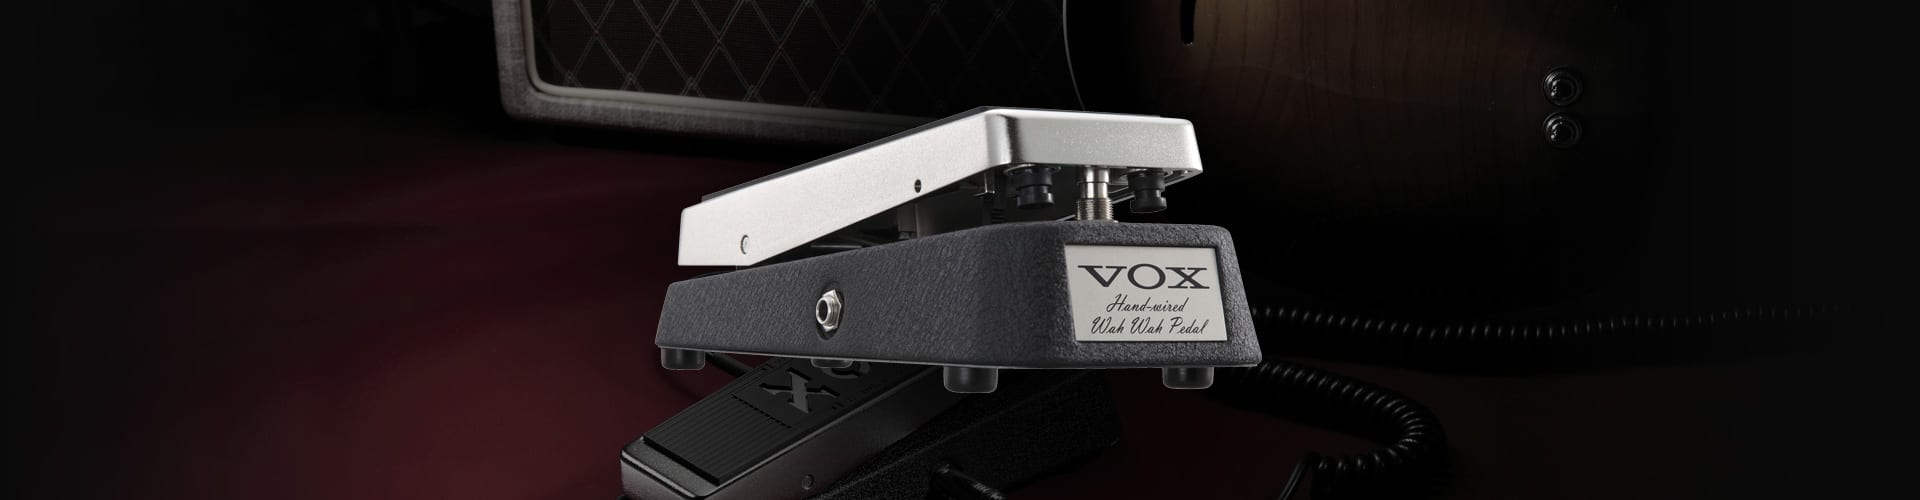 Wah wah pedal vox The VOX